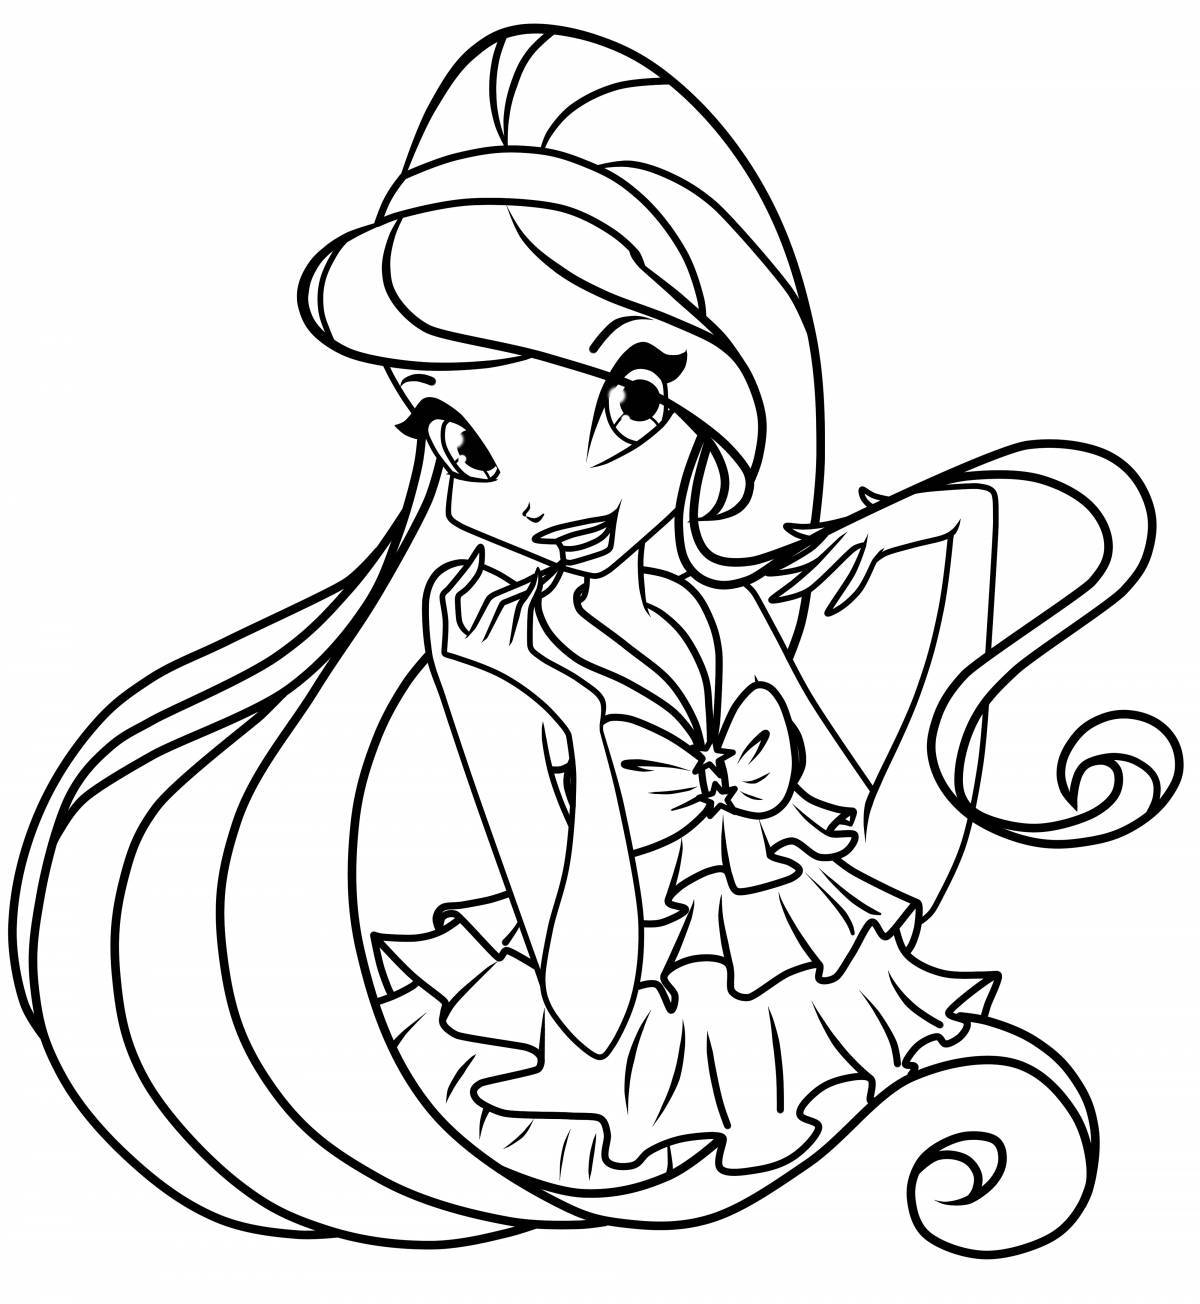 Bloom Winx spectacular coloring book